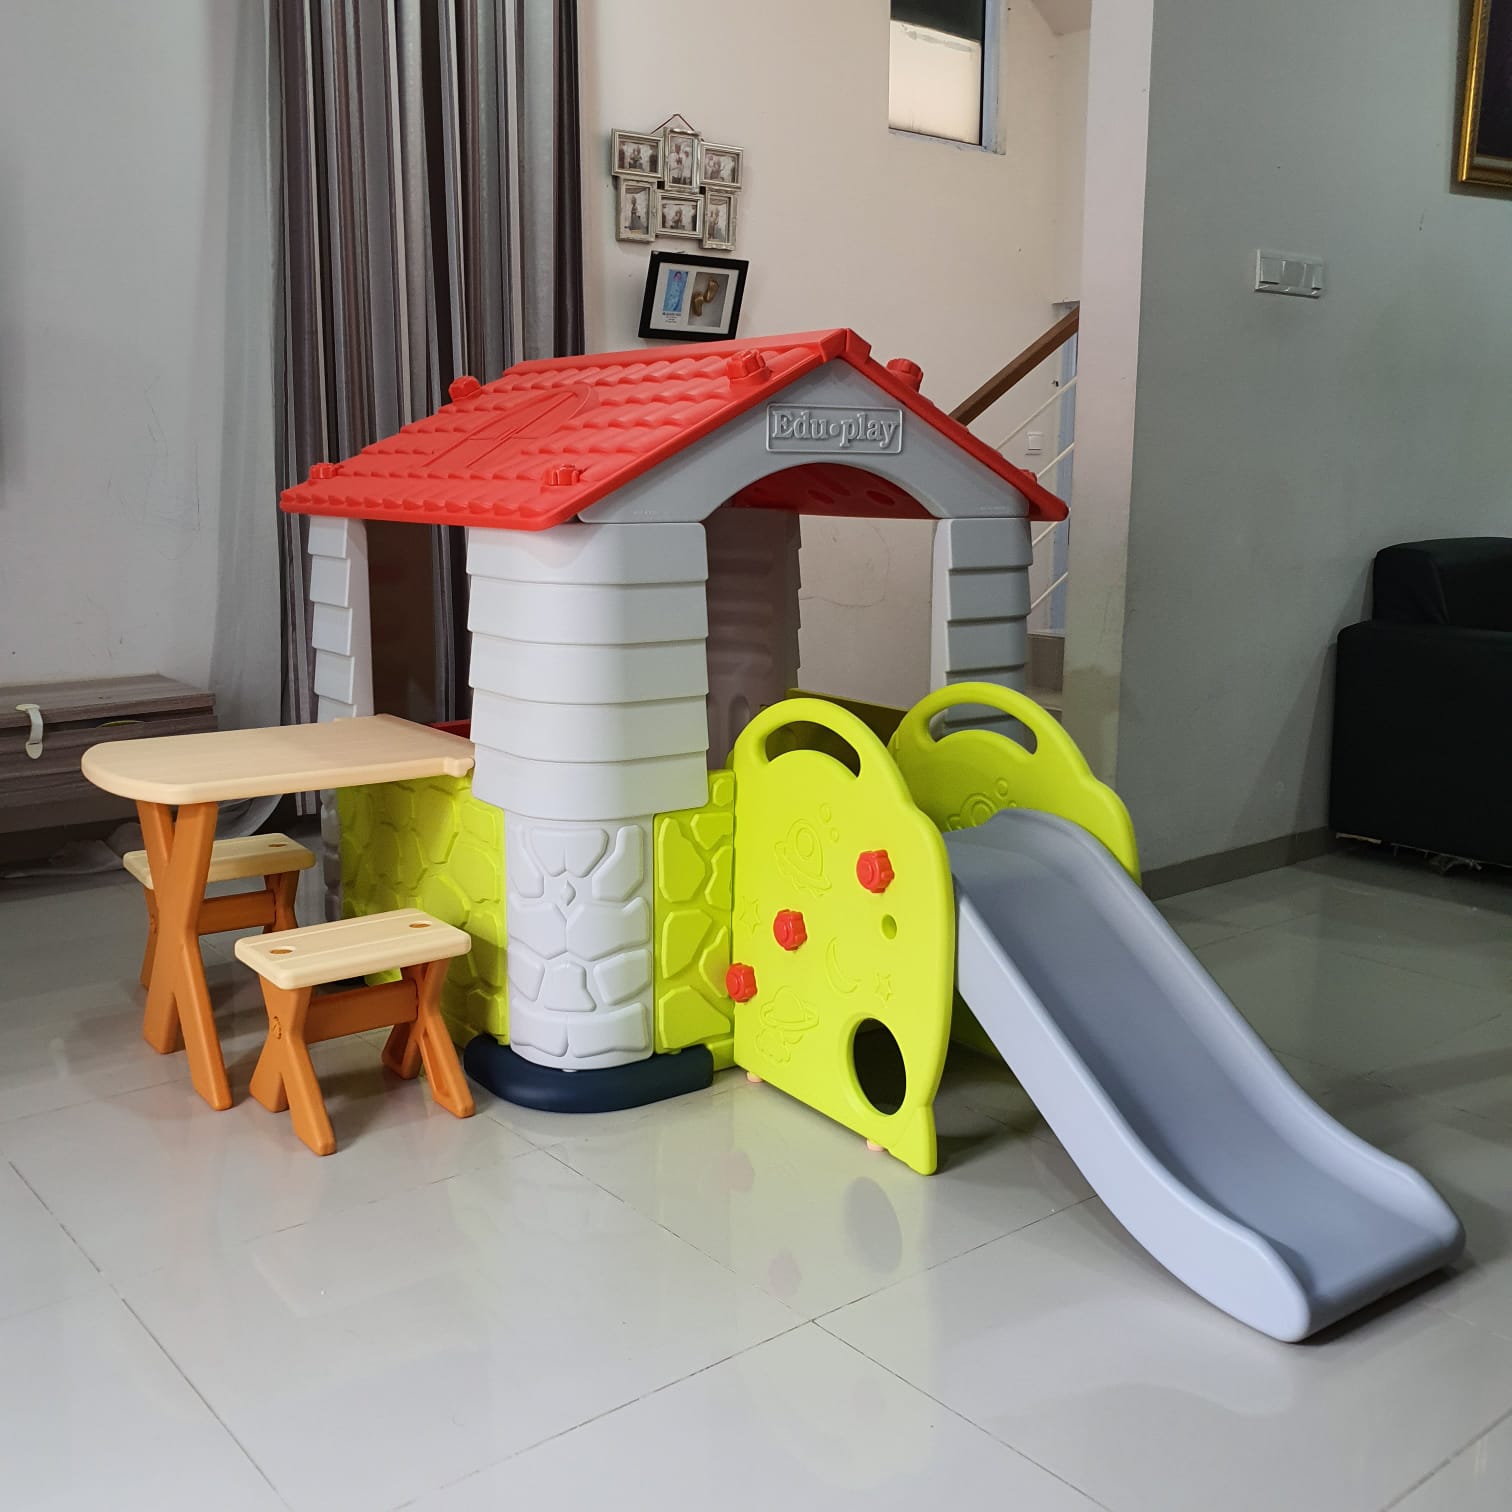 EDUPLAY PLAYHOUSE 4 WITH SLIDE AND TABLE SET